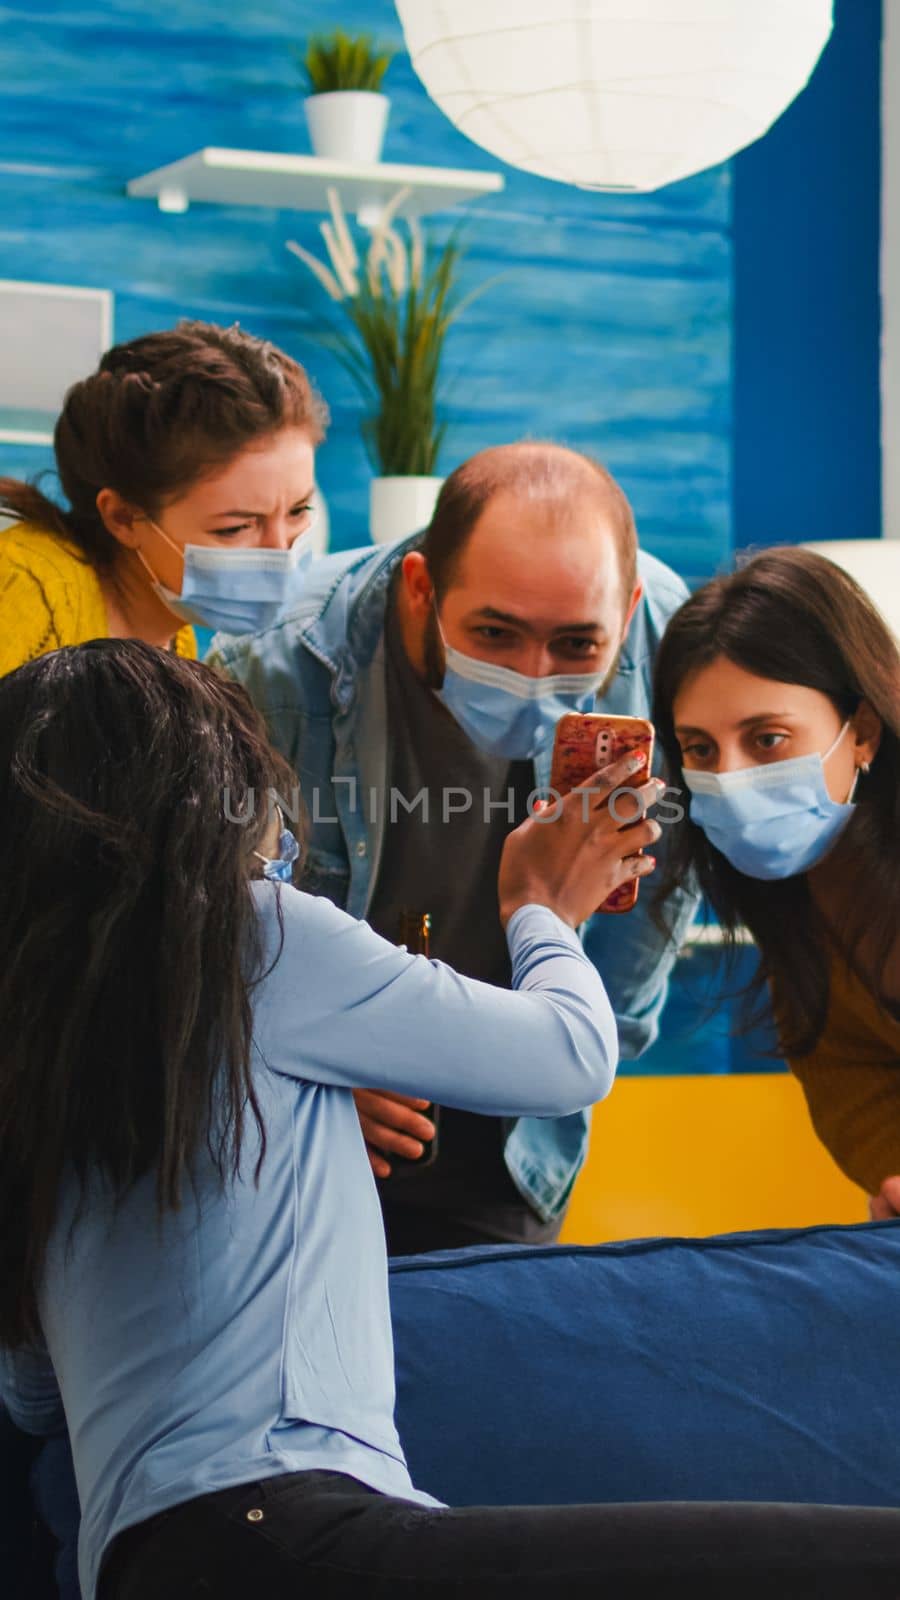 African woman showing video to friends on smartphone in living room wearing face mask as prevention against covid19 infection while hanging out. Diverse people socializing keeping social distance